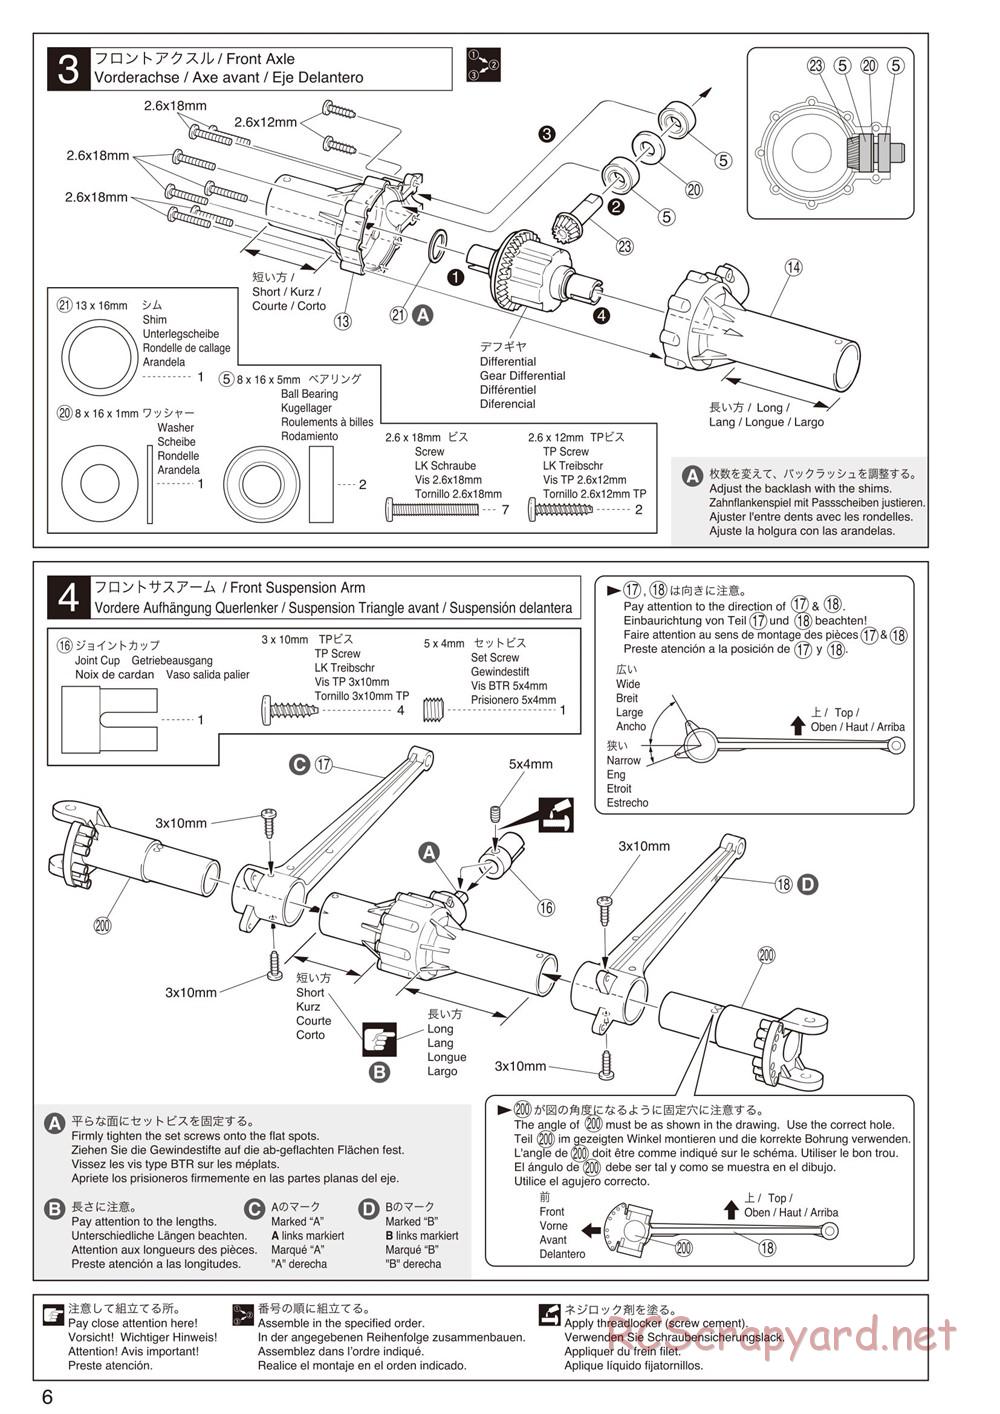 Kyosho - Mad Force Cruiser - Manual - Page 6